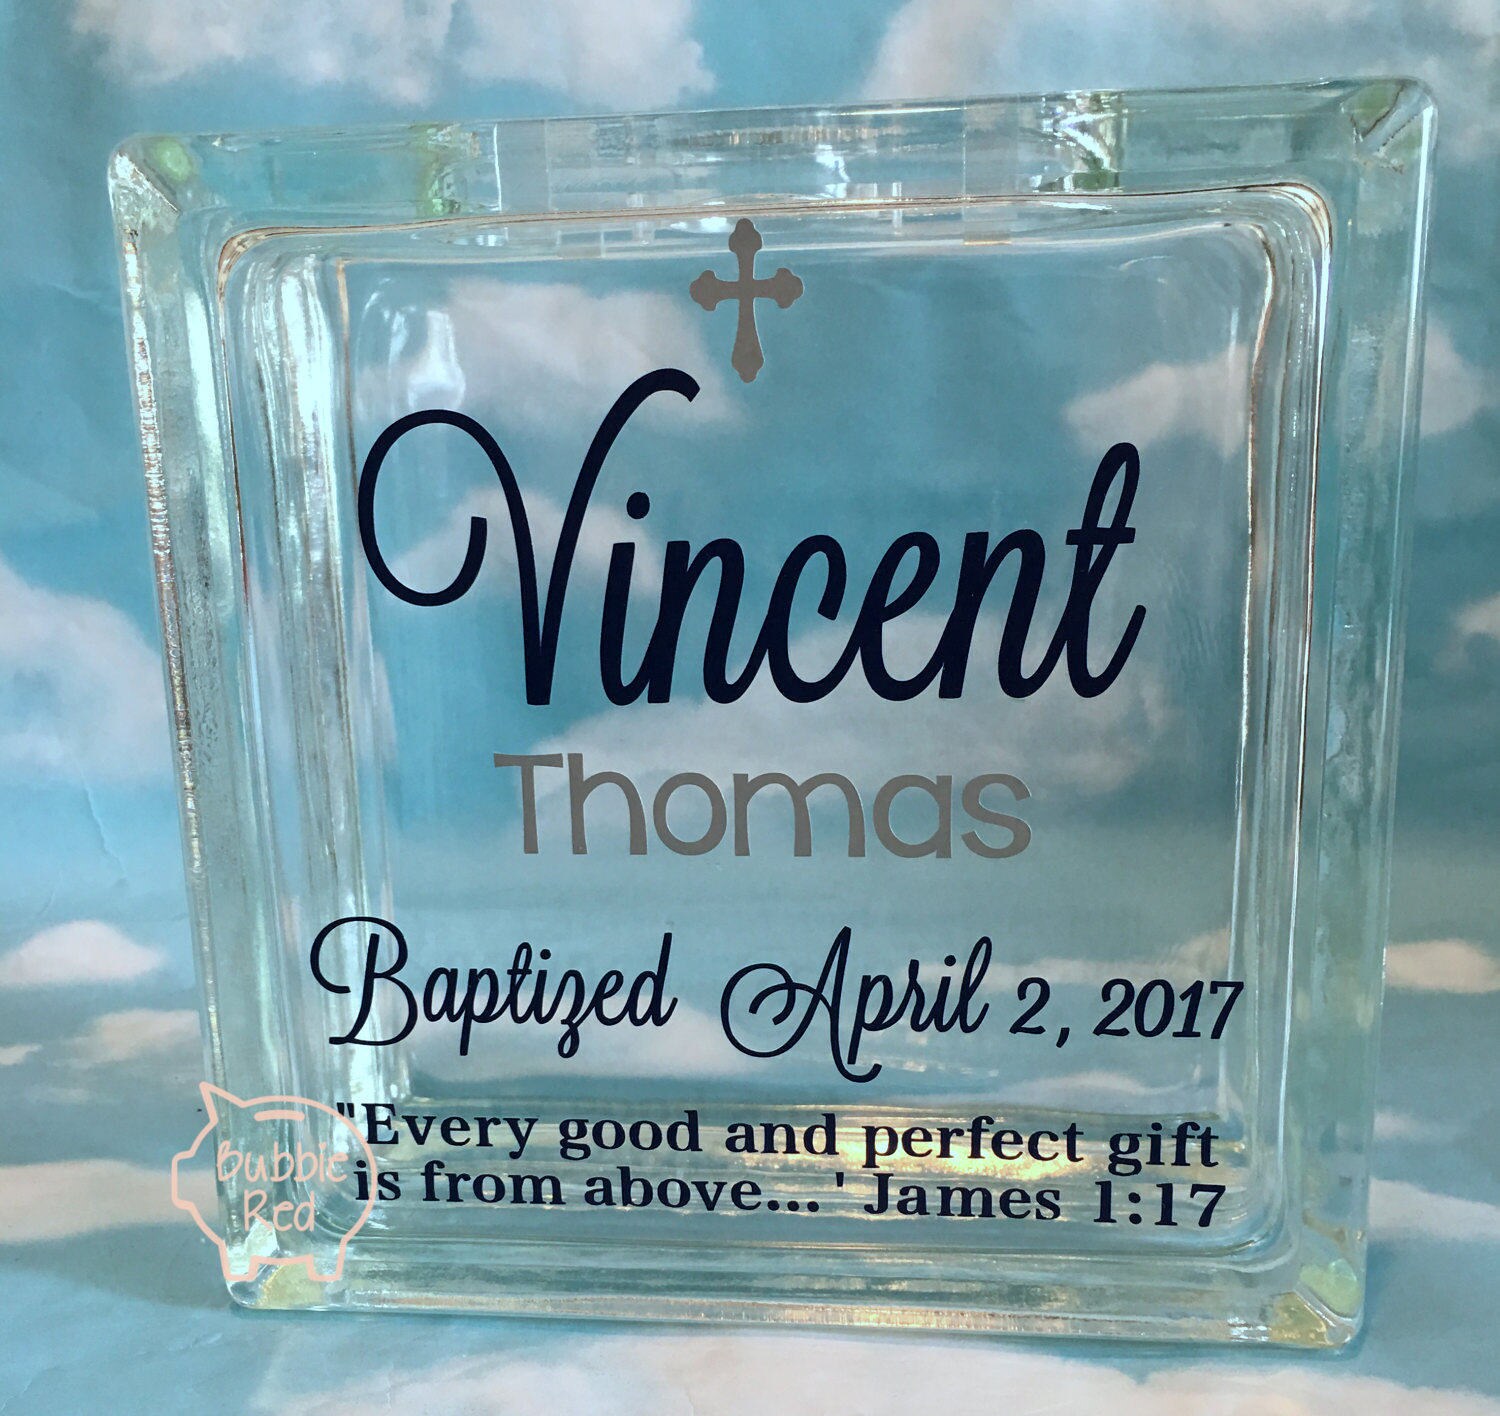 baptism gifts for boys